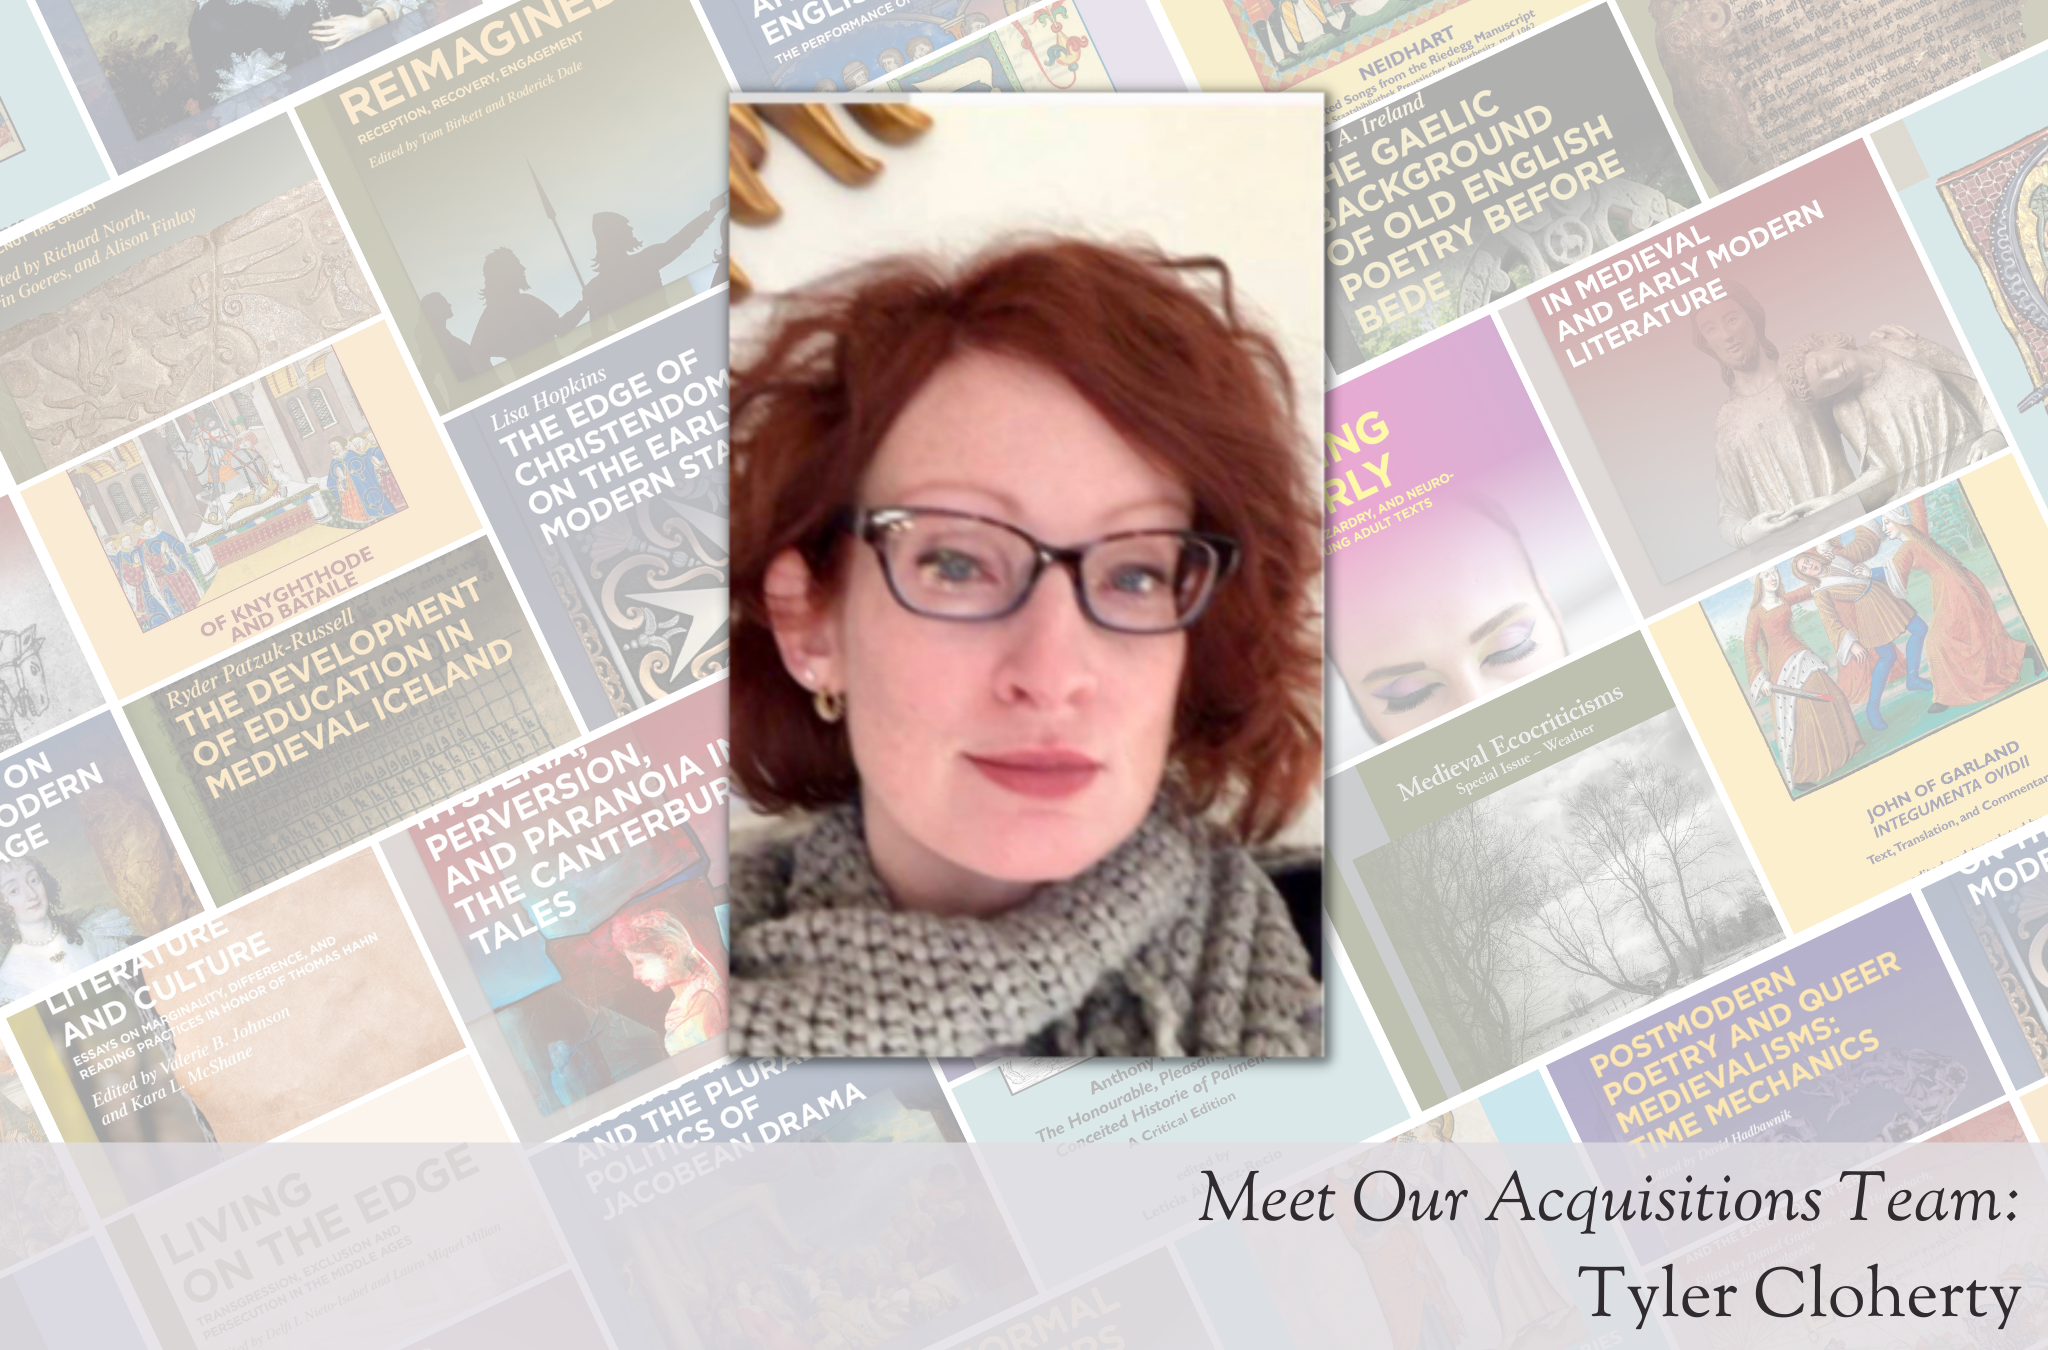 A picture of Tyler Cloherty, a woman with red hair and glasses, in front of a background of a collage of MIP book covers